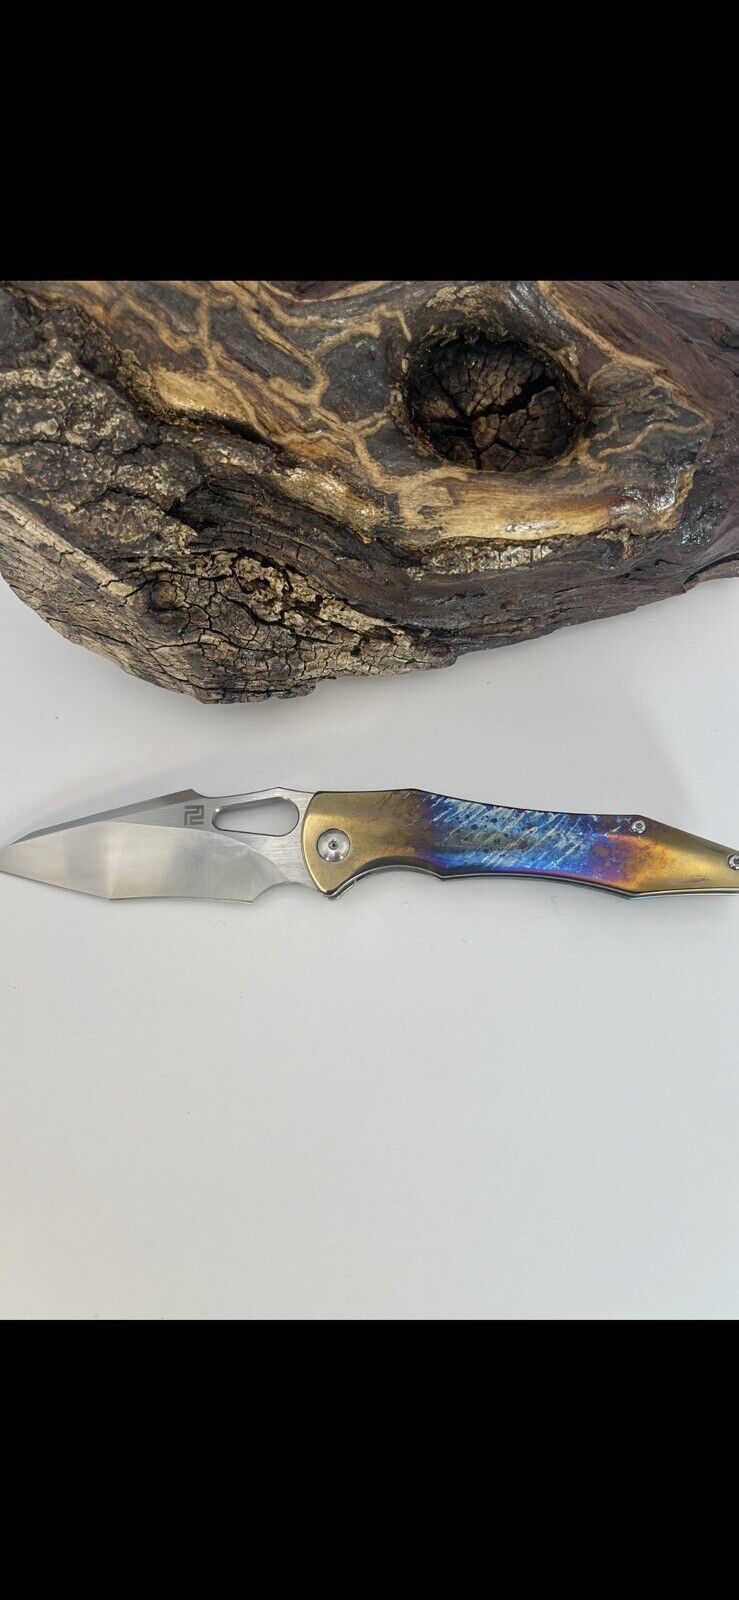 Artisan Cutlery, Great White Titanium: Custom Anodized Scales / S35VN Blade 